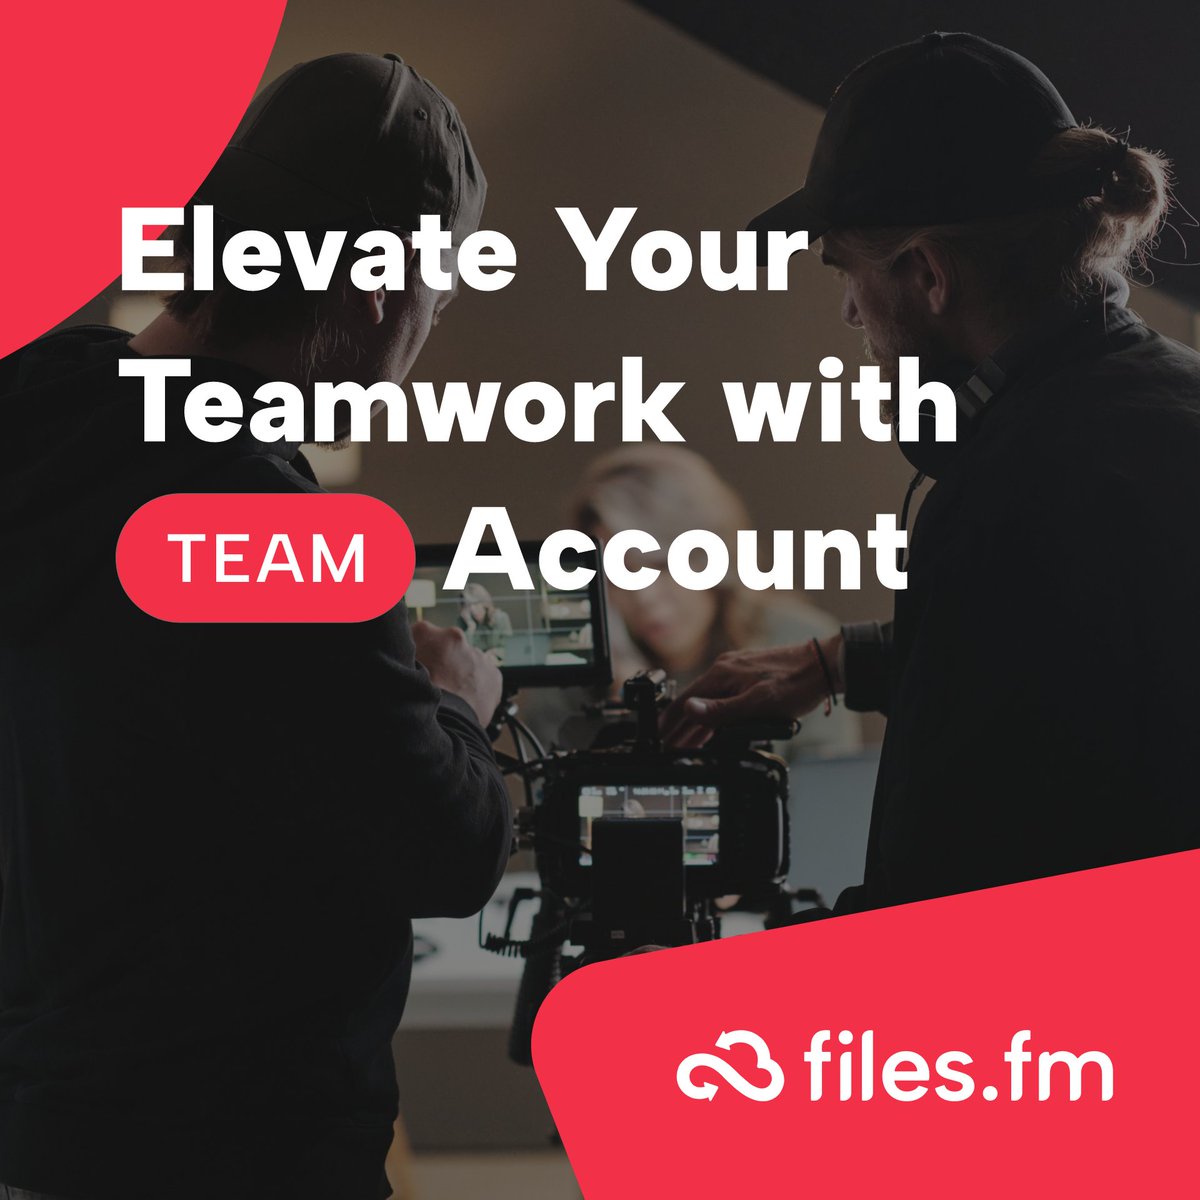 As your team expands, so do your possibilities! Our TEAM account comes with 2TB of disk space and 4 users! And you can easily add extra storage space and users whenever you need them. Discover all the options available with our TEAM account here - files.fm/storage-plans